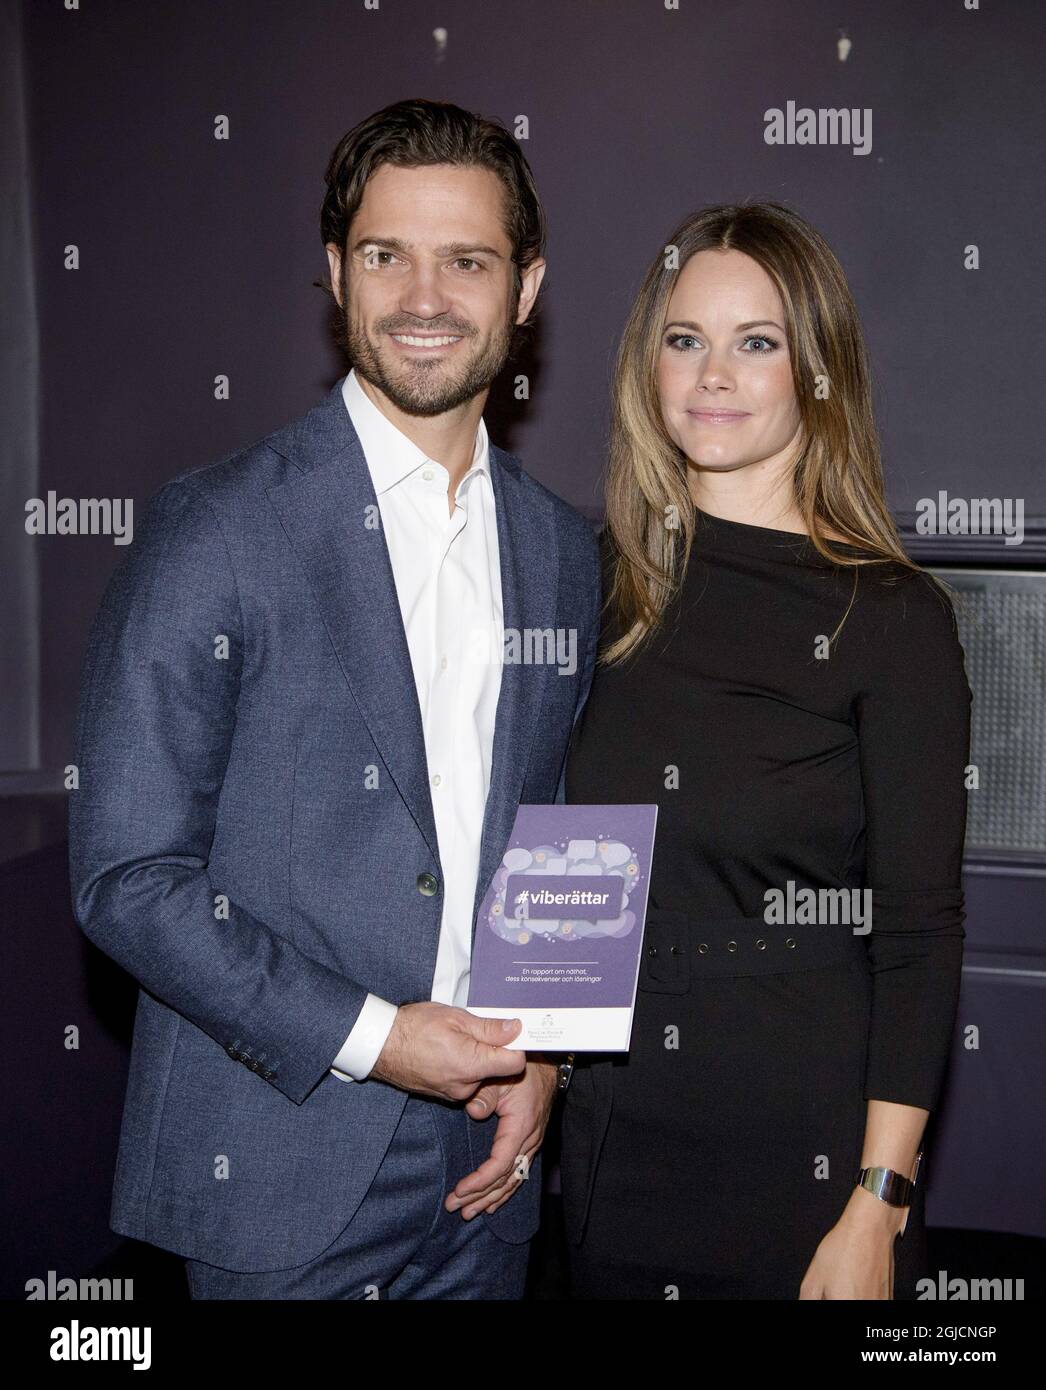 Prince Carl Philip and Princess Sofia during the Prince Couples foundations presentation of a report about internet hate in Stockholm on Tuesday October 22, 2019 Foto: Jessica Gow / TT kod 10070  Stock Photo